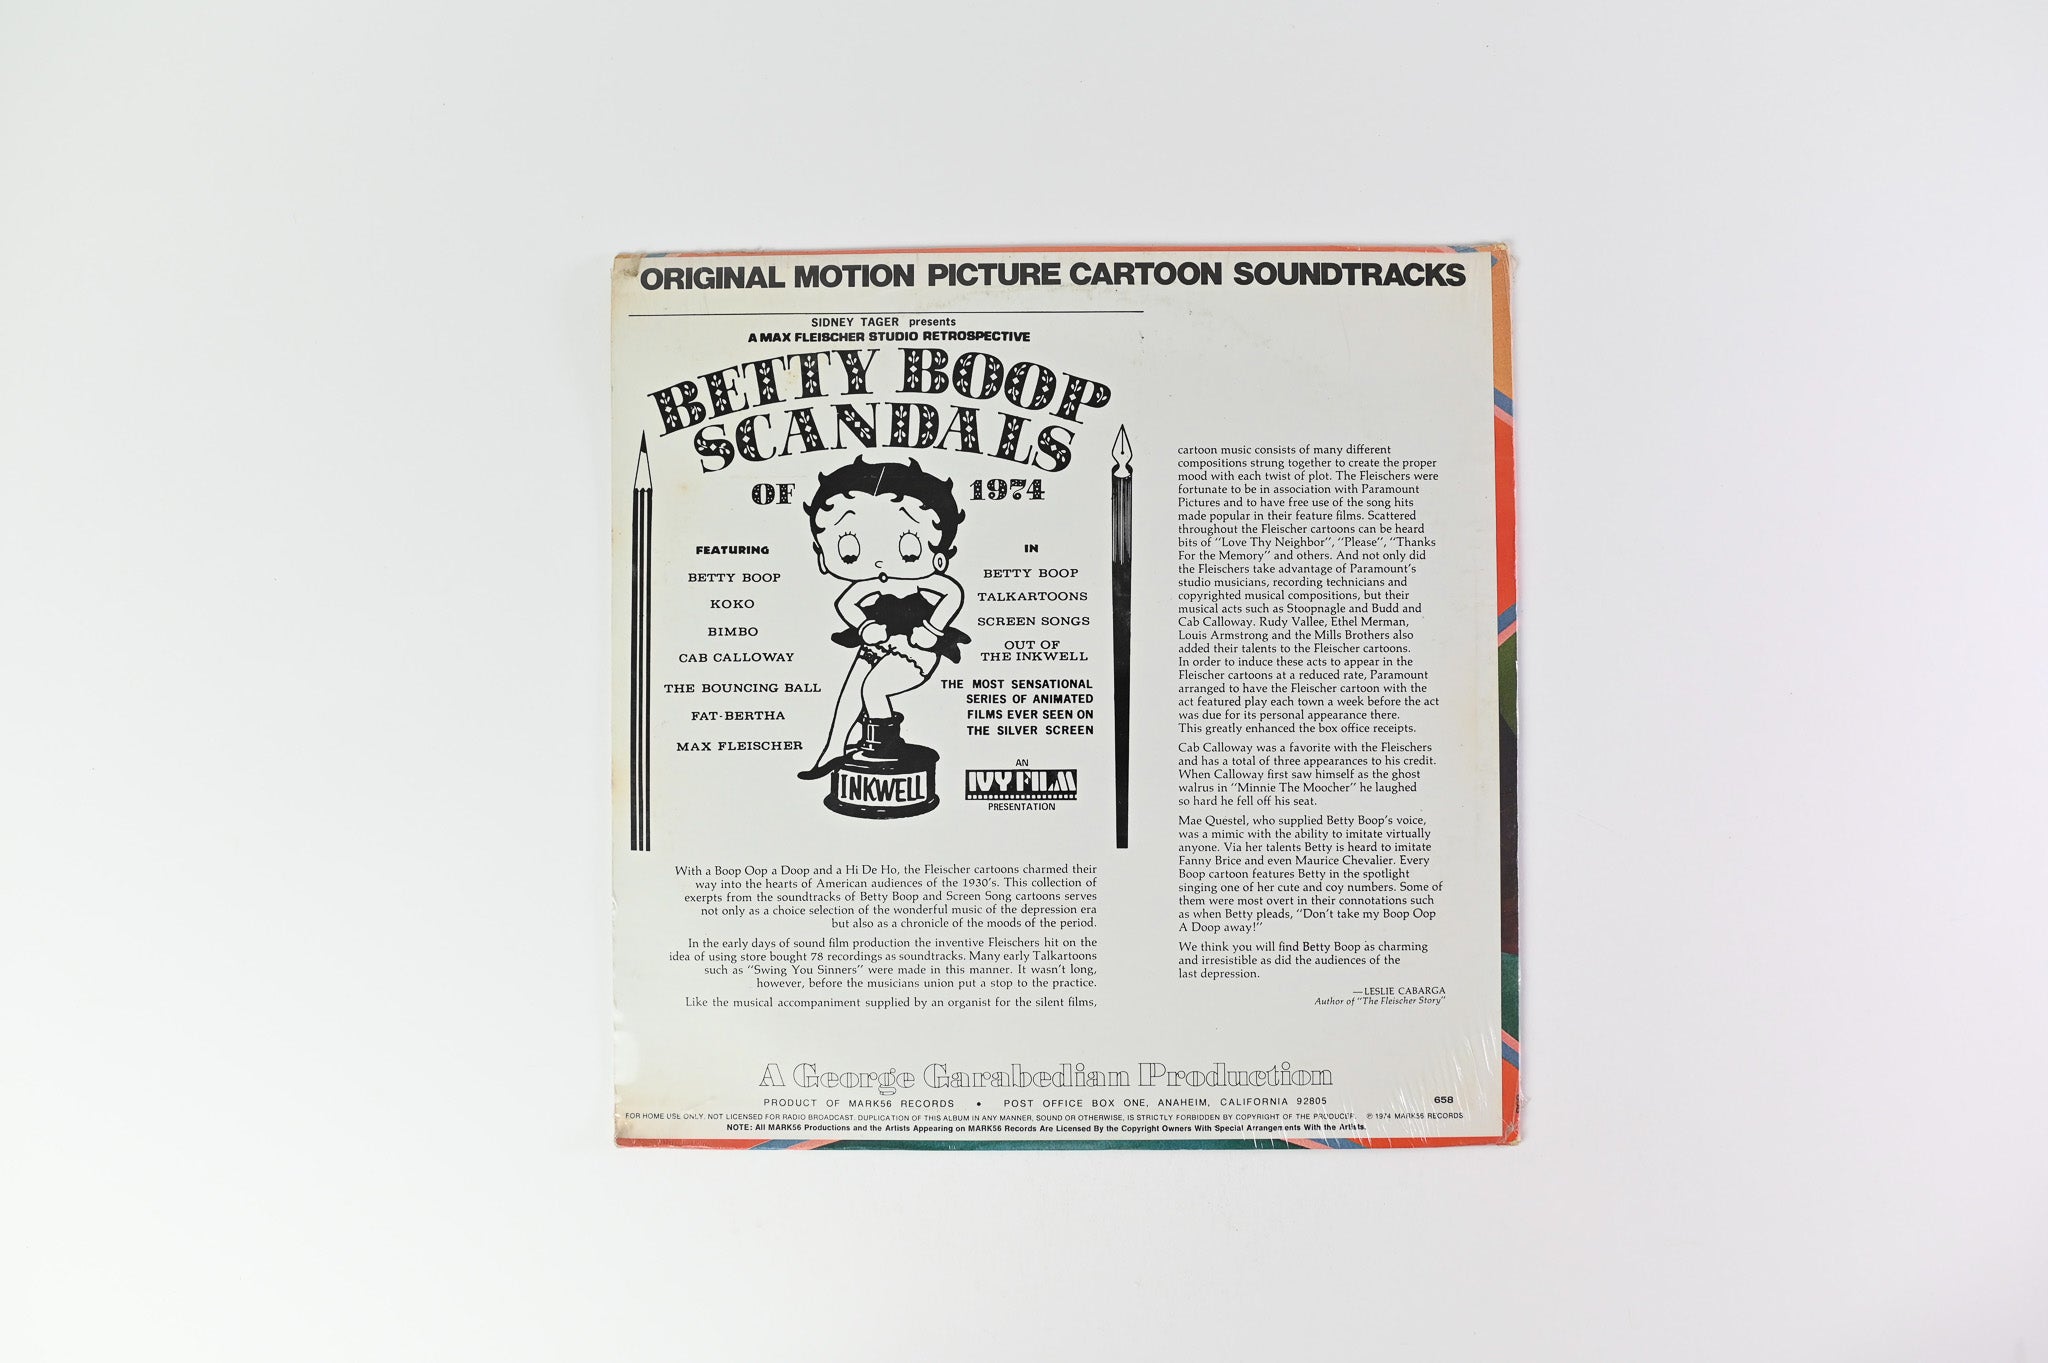 Mae Questel - Betty Boop - Scandals Of 1974 (Original Motion Picture Soundtrack) on Mark56 Records Sealed